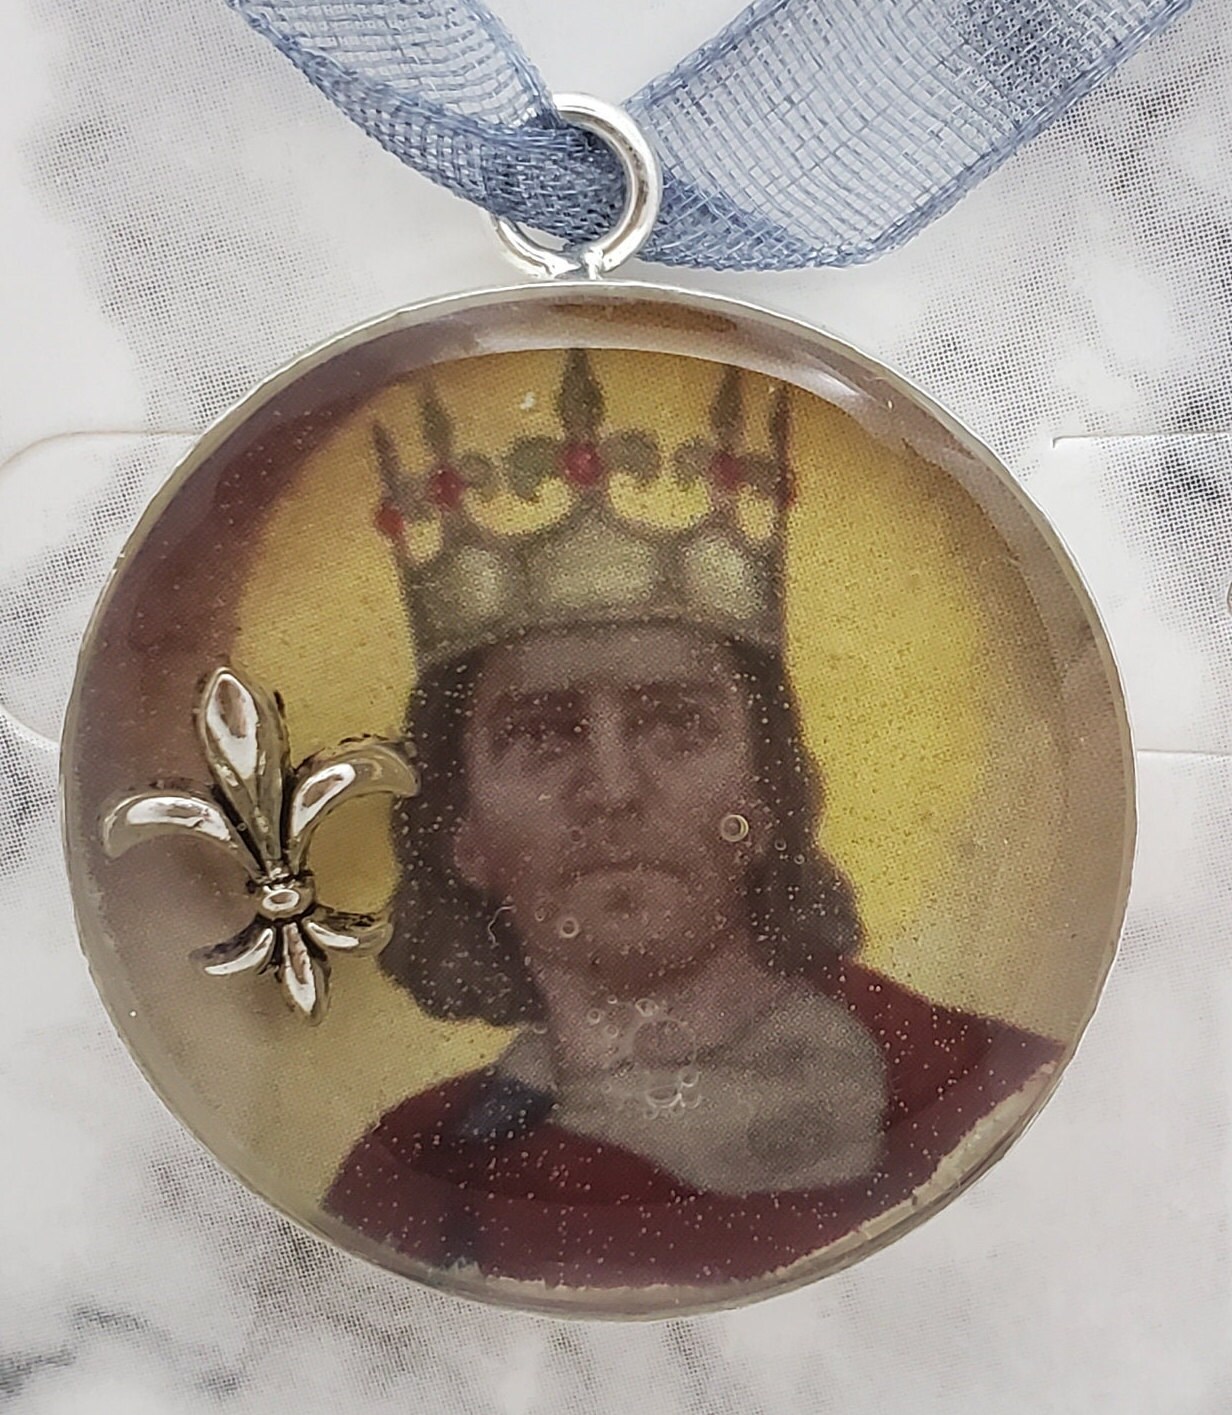 Necklace Pendant Coin of King Louis XIV Very Beautiful 